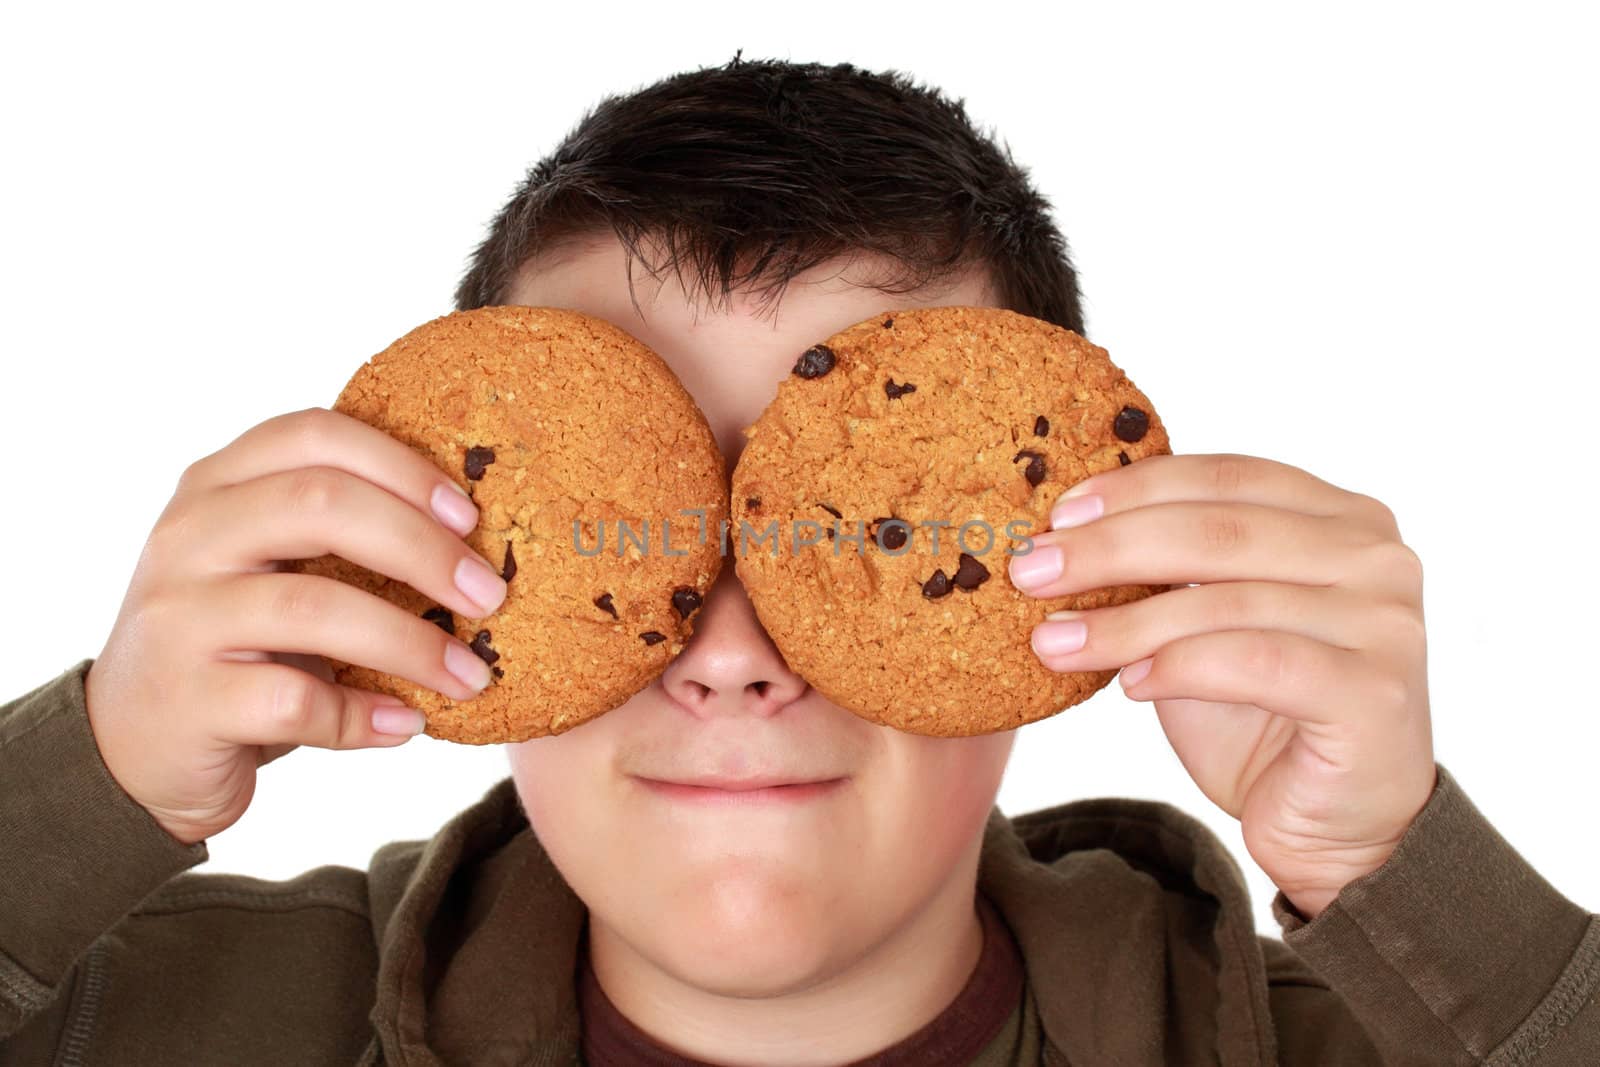 teen boy with cookies by lanalanglois